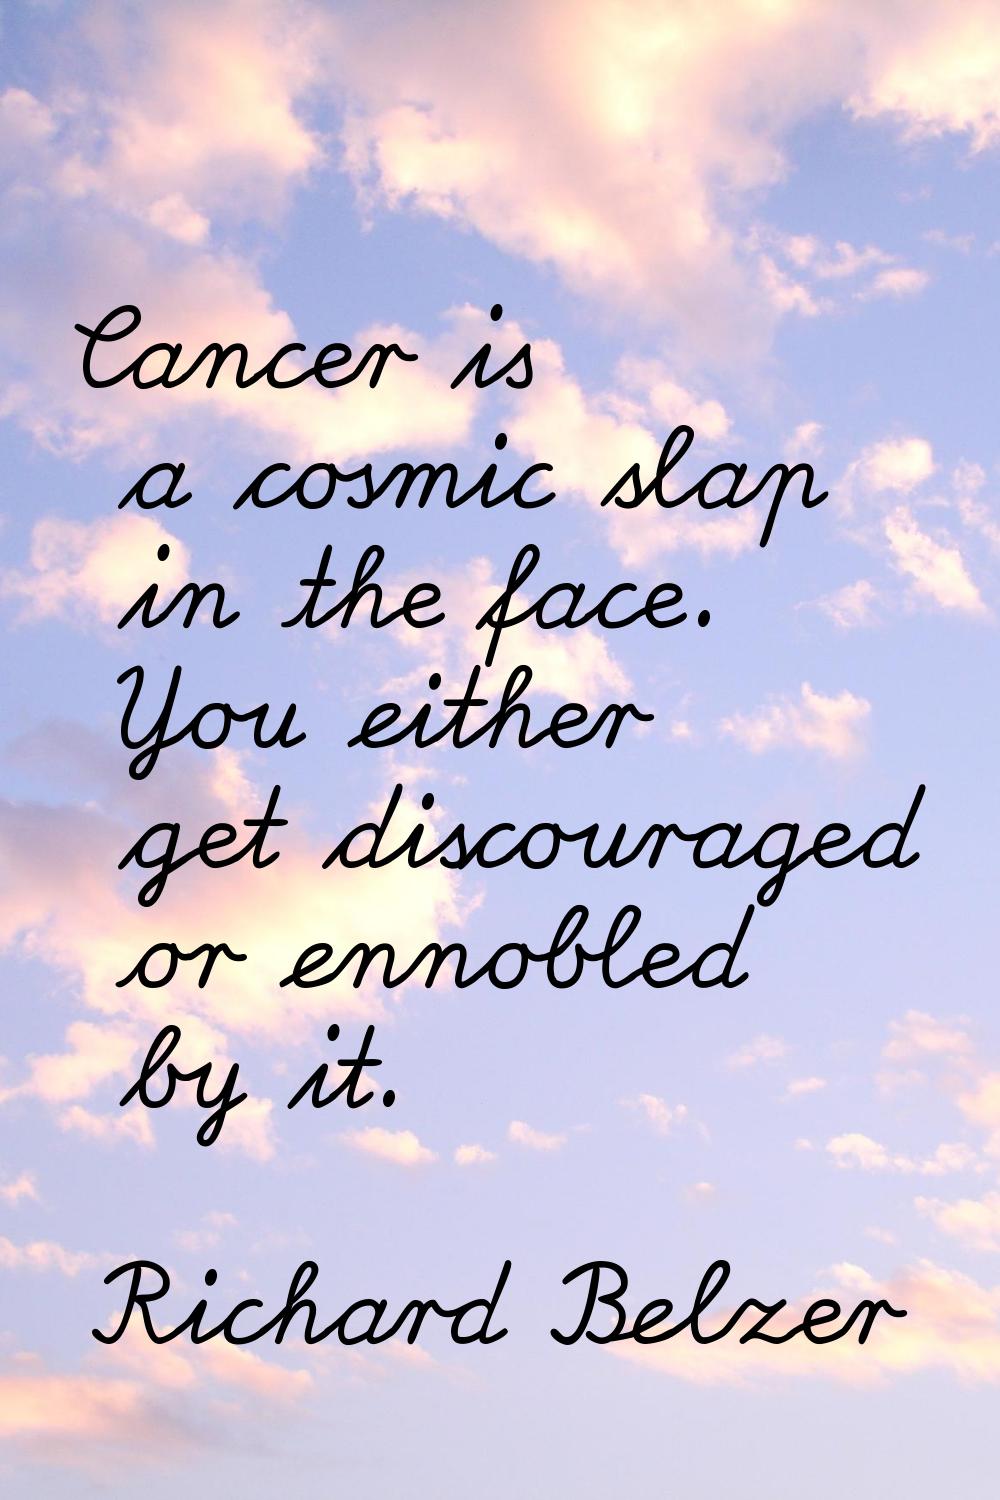 Cancer is a cosmic slap in the face. You either get discouraged or ennobled by it.